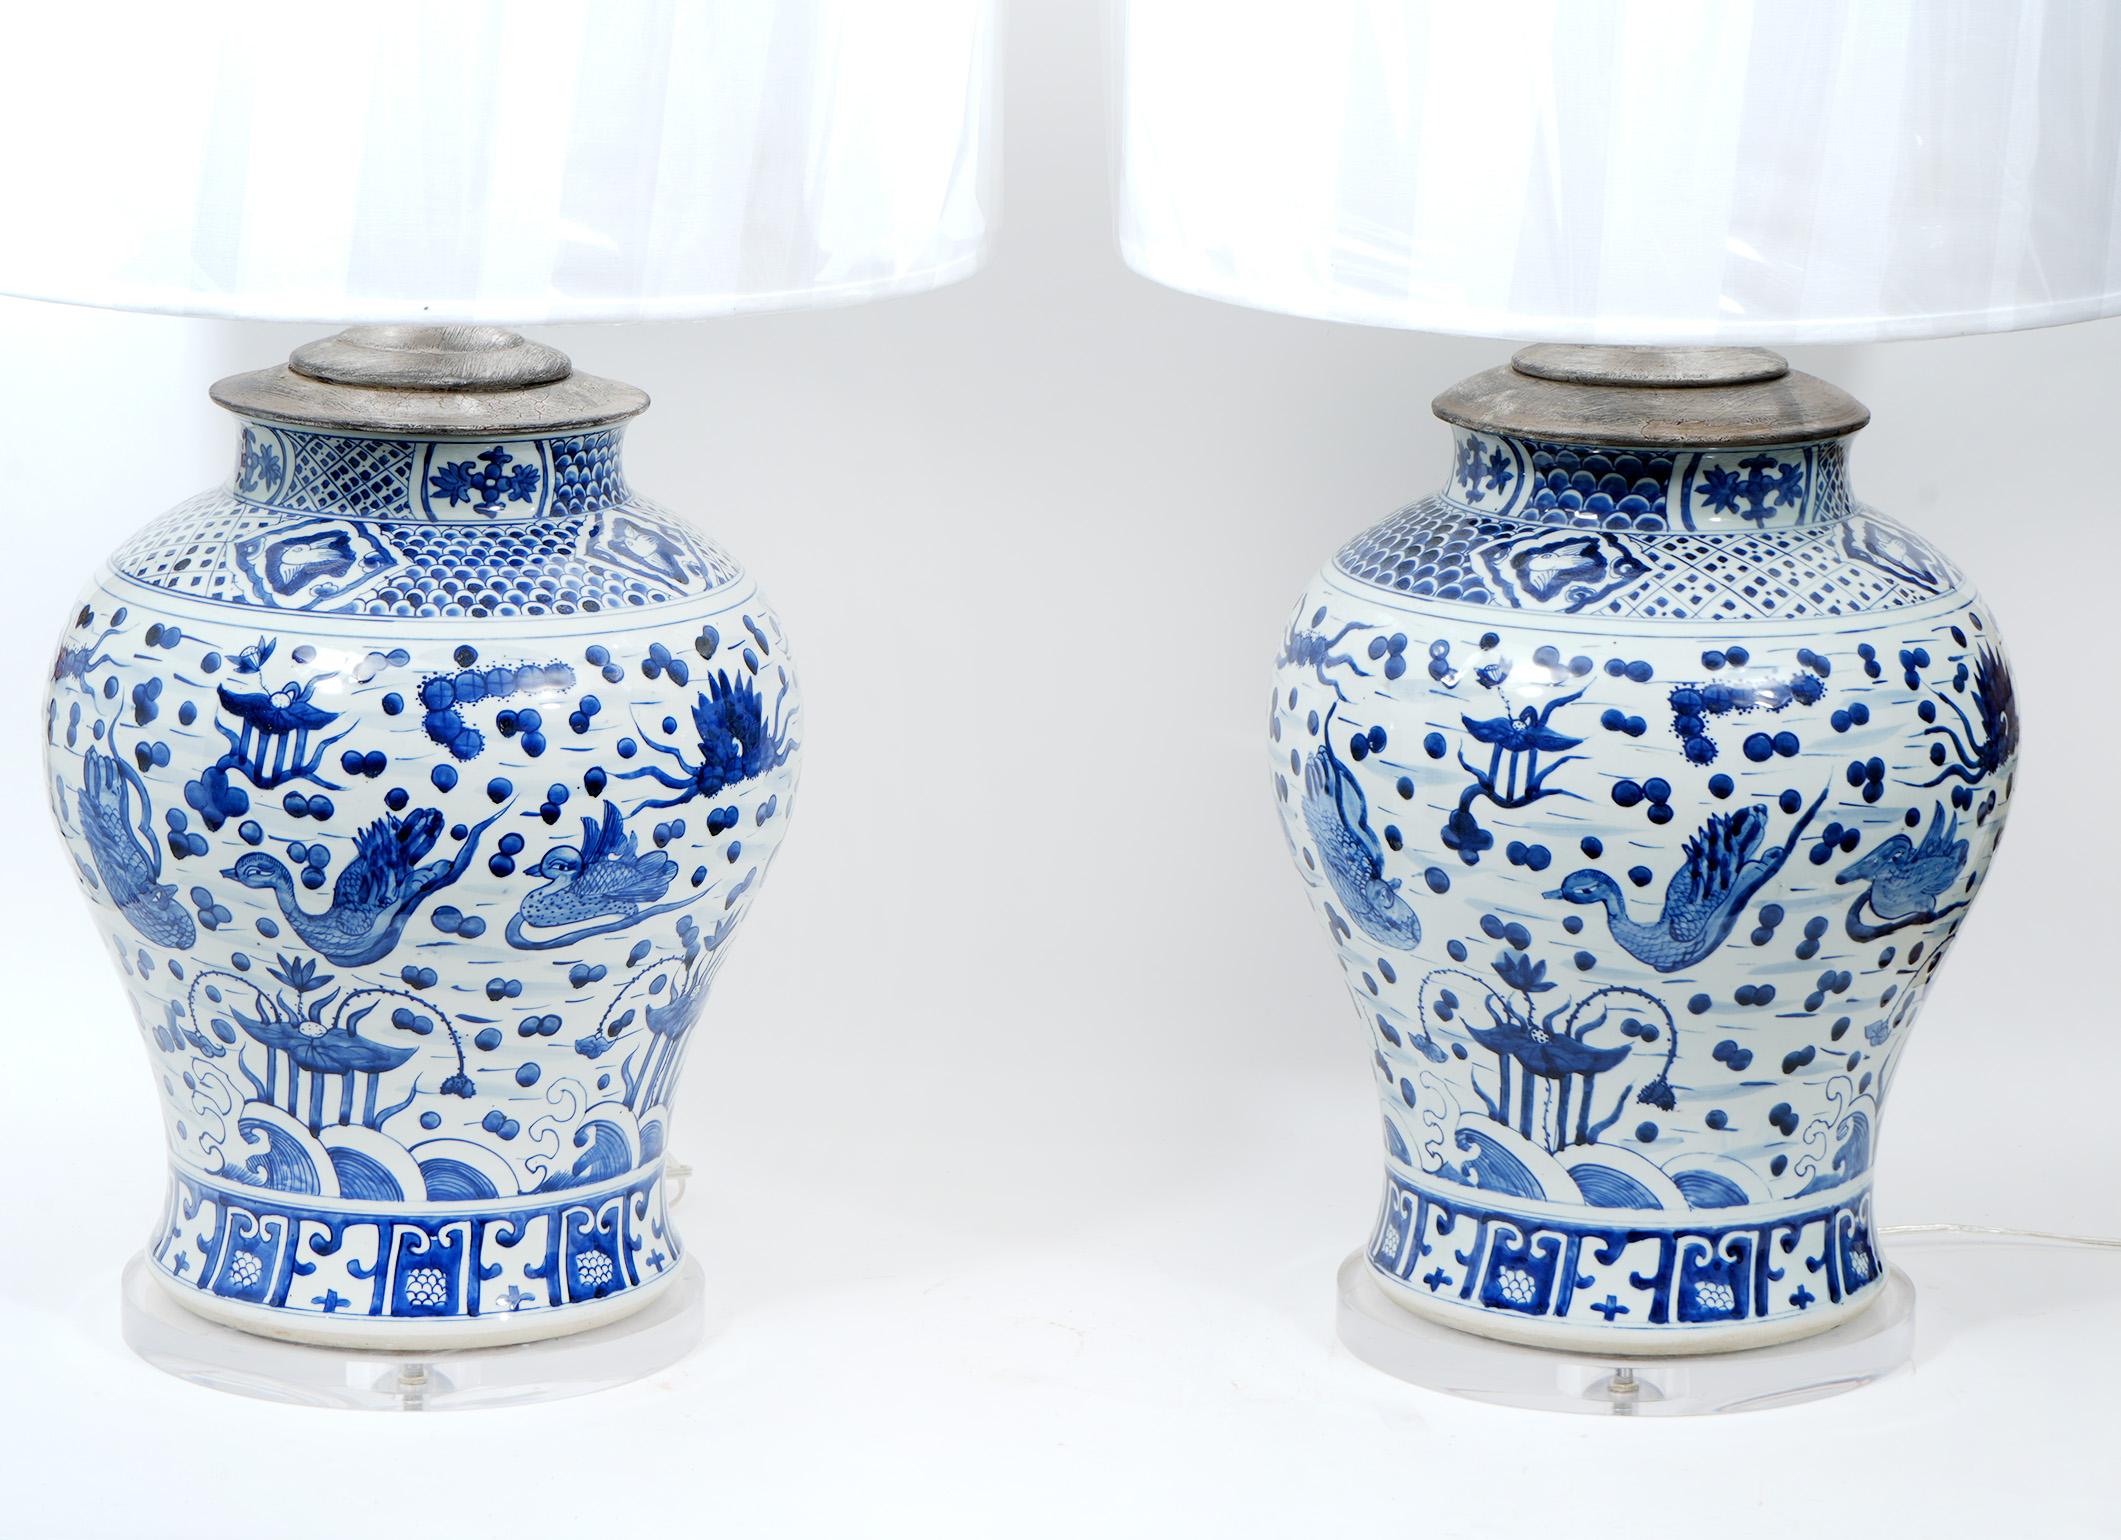 Large pair of large Chinese Blue and White porcelain lamps. Large antique vases mounted and made into lamps.  Lamps are newly rewired. Lucite is new. Shades are included. Overall 38